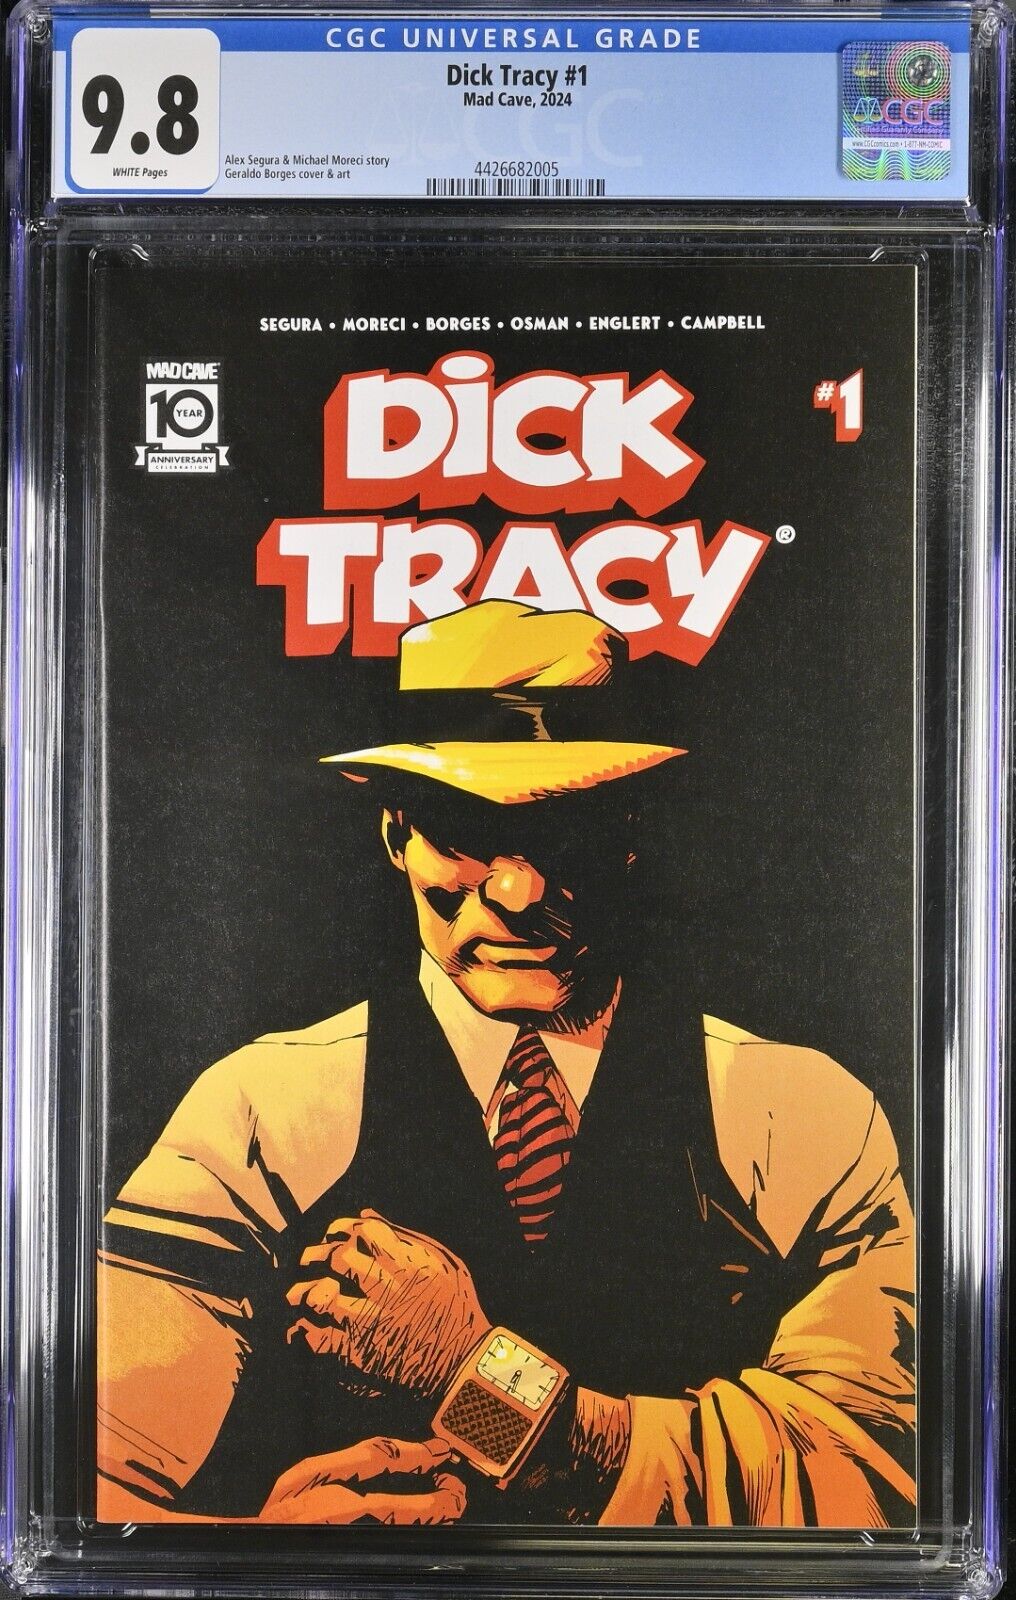 Dick Tracy #1 CGC 9.8 Geraldo Borges Cover A Mad Cave Begins Publishing 2024 WP